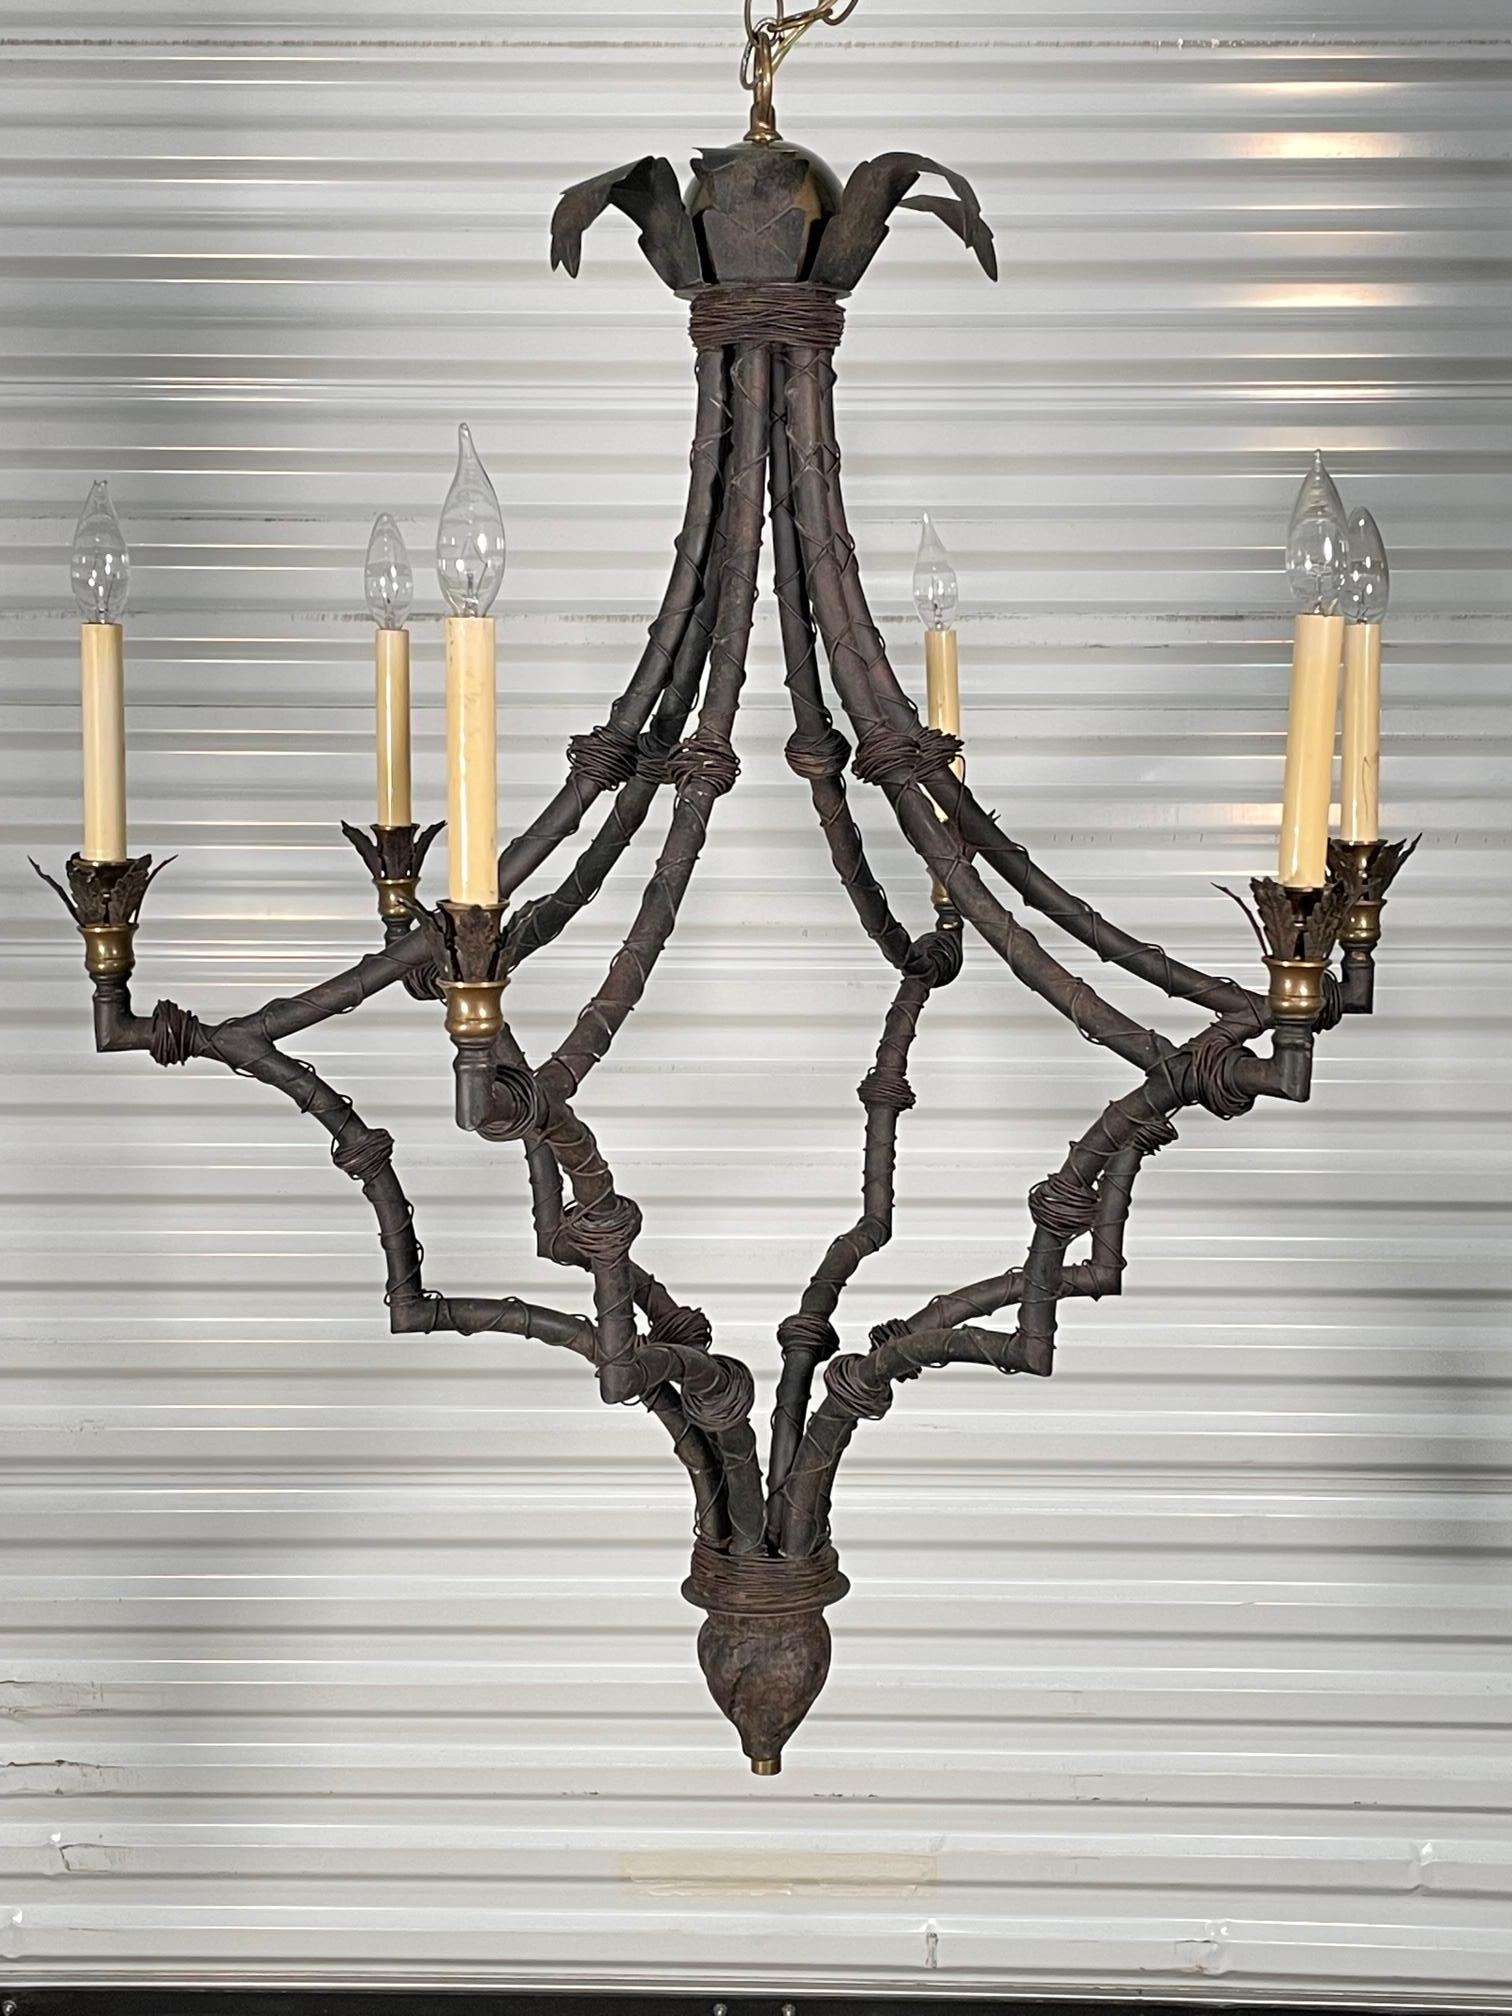 Large 6-light iron chandelier features palm frond details along with a wire wrapped frame in a modern faux bamboo motif. Good condition with imperfections consistent with age (see photos).
 
 